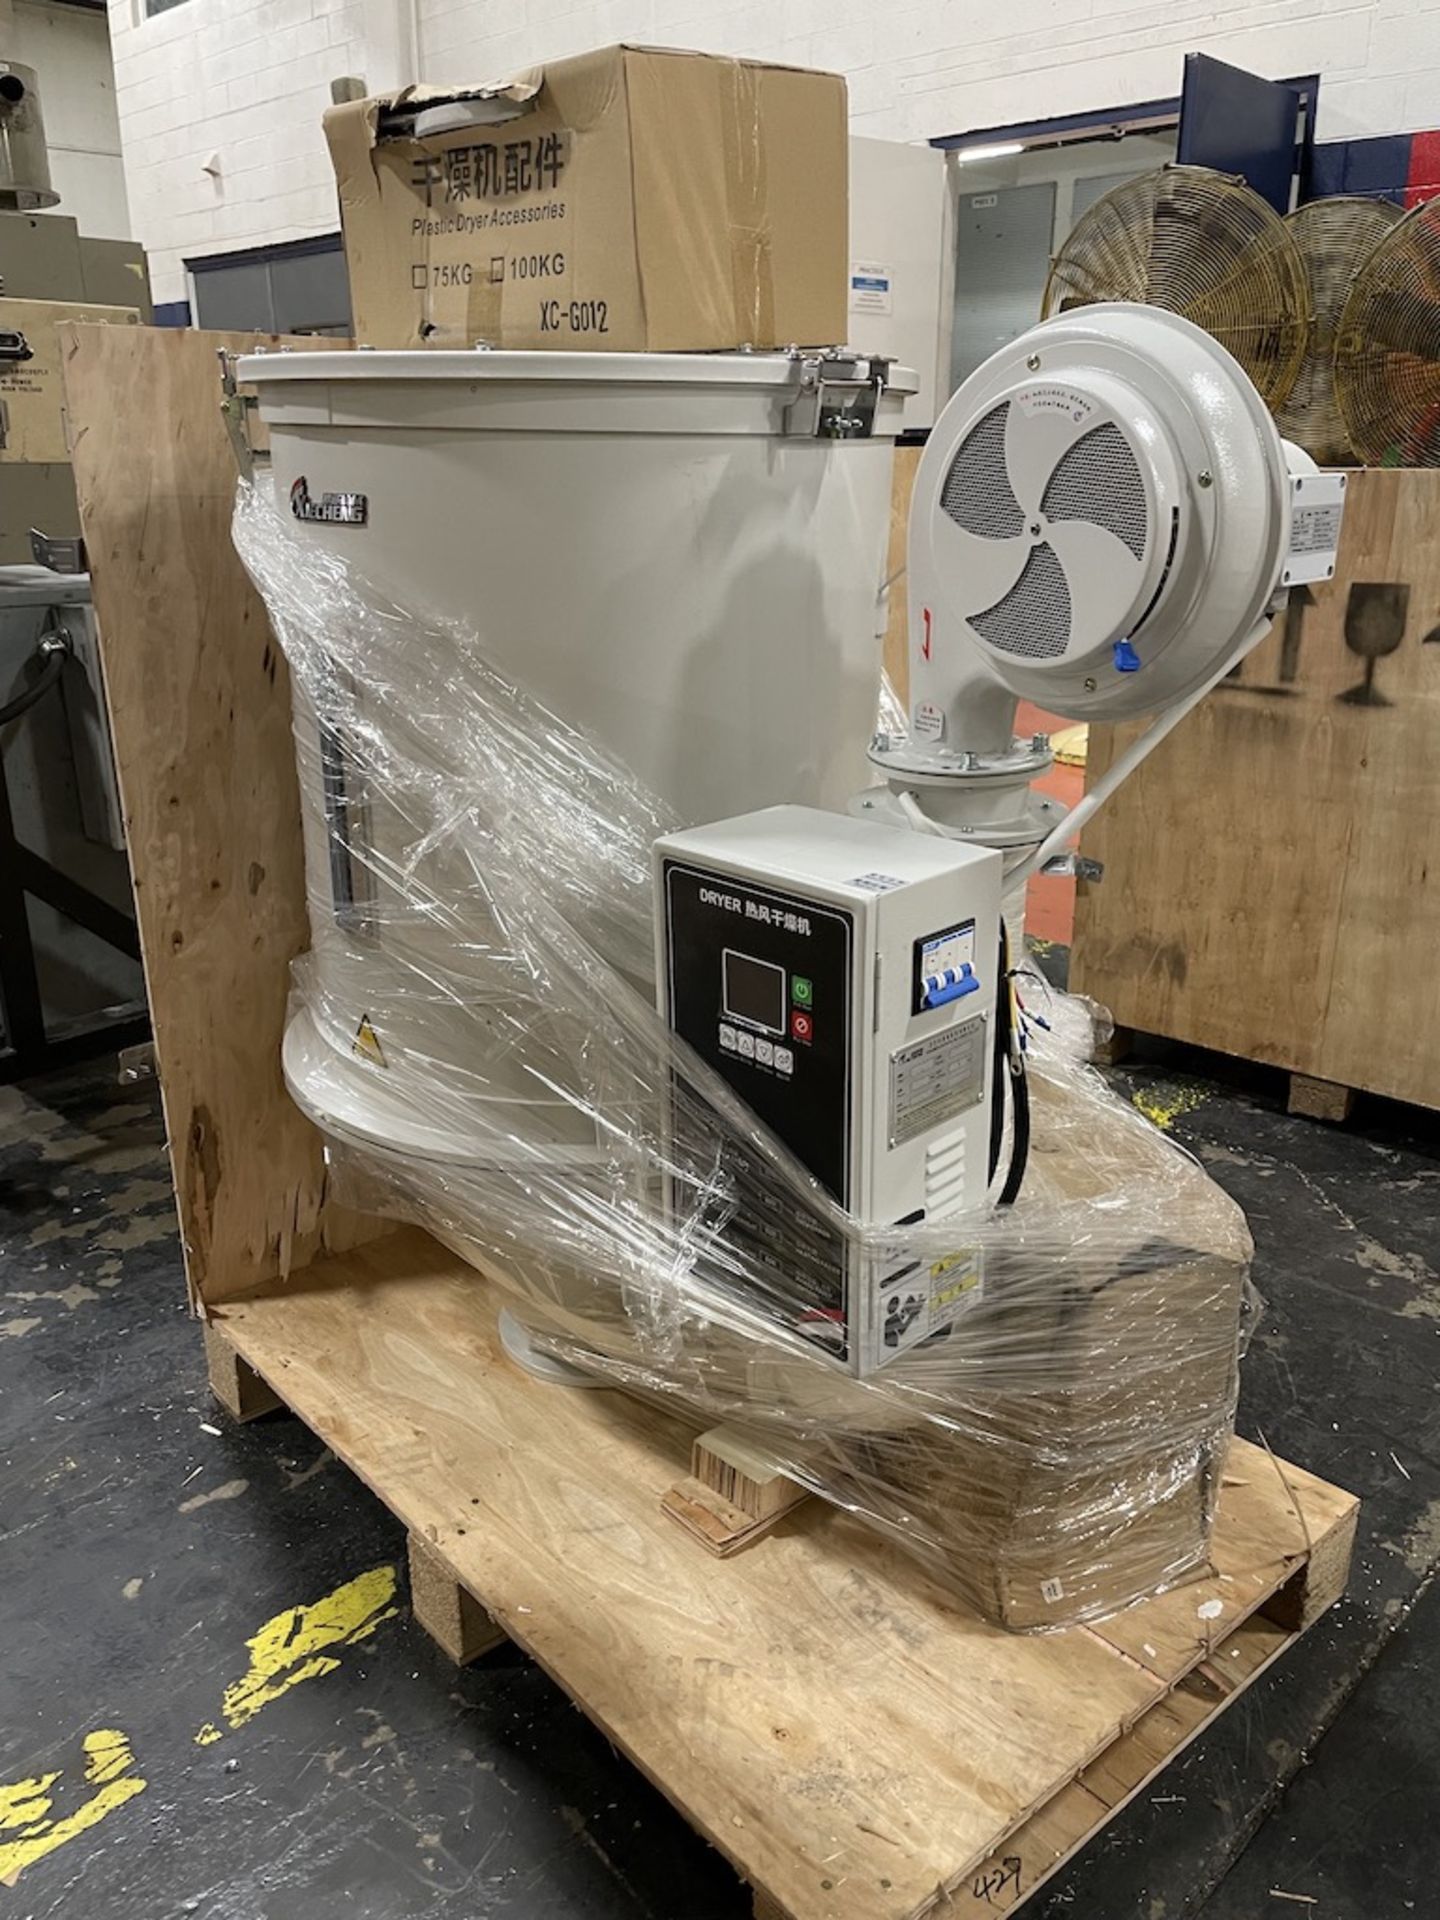 Xiecheng XC-G100KG Hot Air Drying Hopper, NEW IN CRATE, New in 2022 - Image 2 of 5